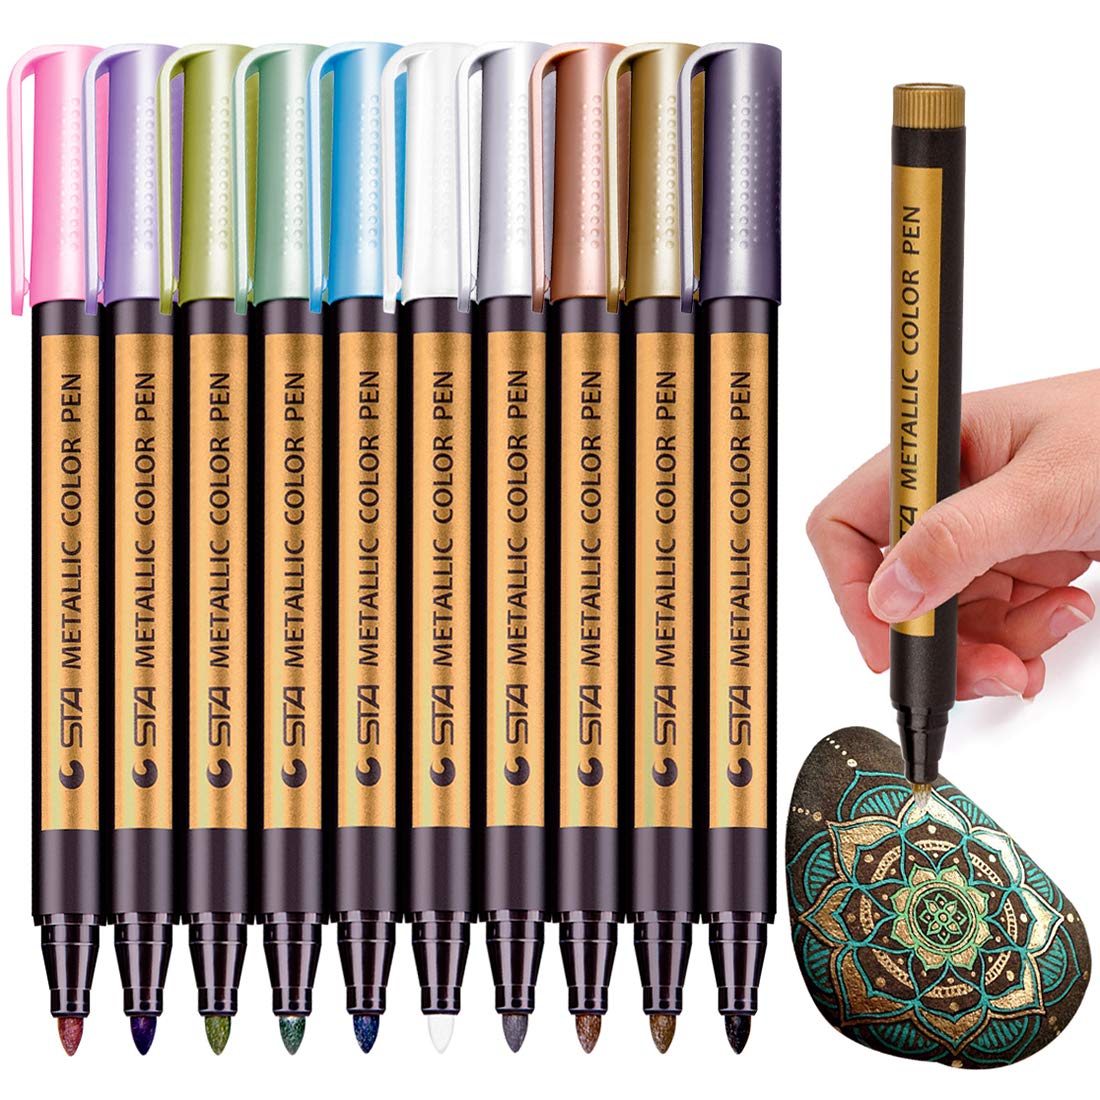 🔥Christmas Hot Sale [50% OFF] Metallic Marker Pens - Set of 8 Colors Paint Markers (Buy 2 Sets Get 1 Set Free Now)